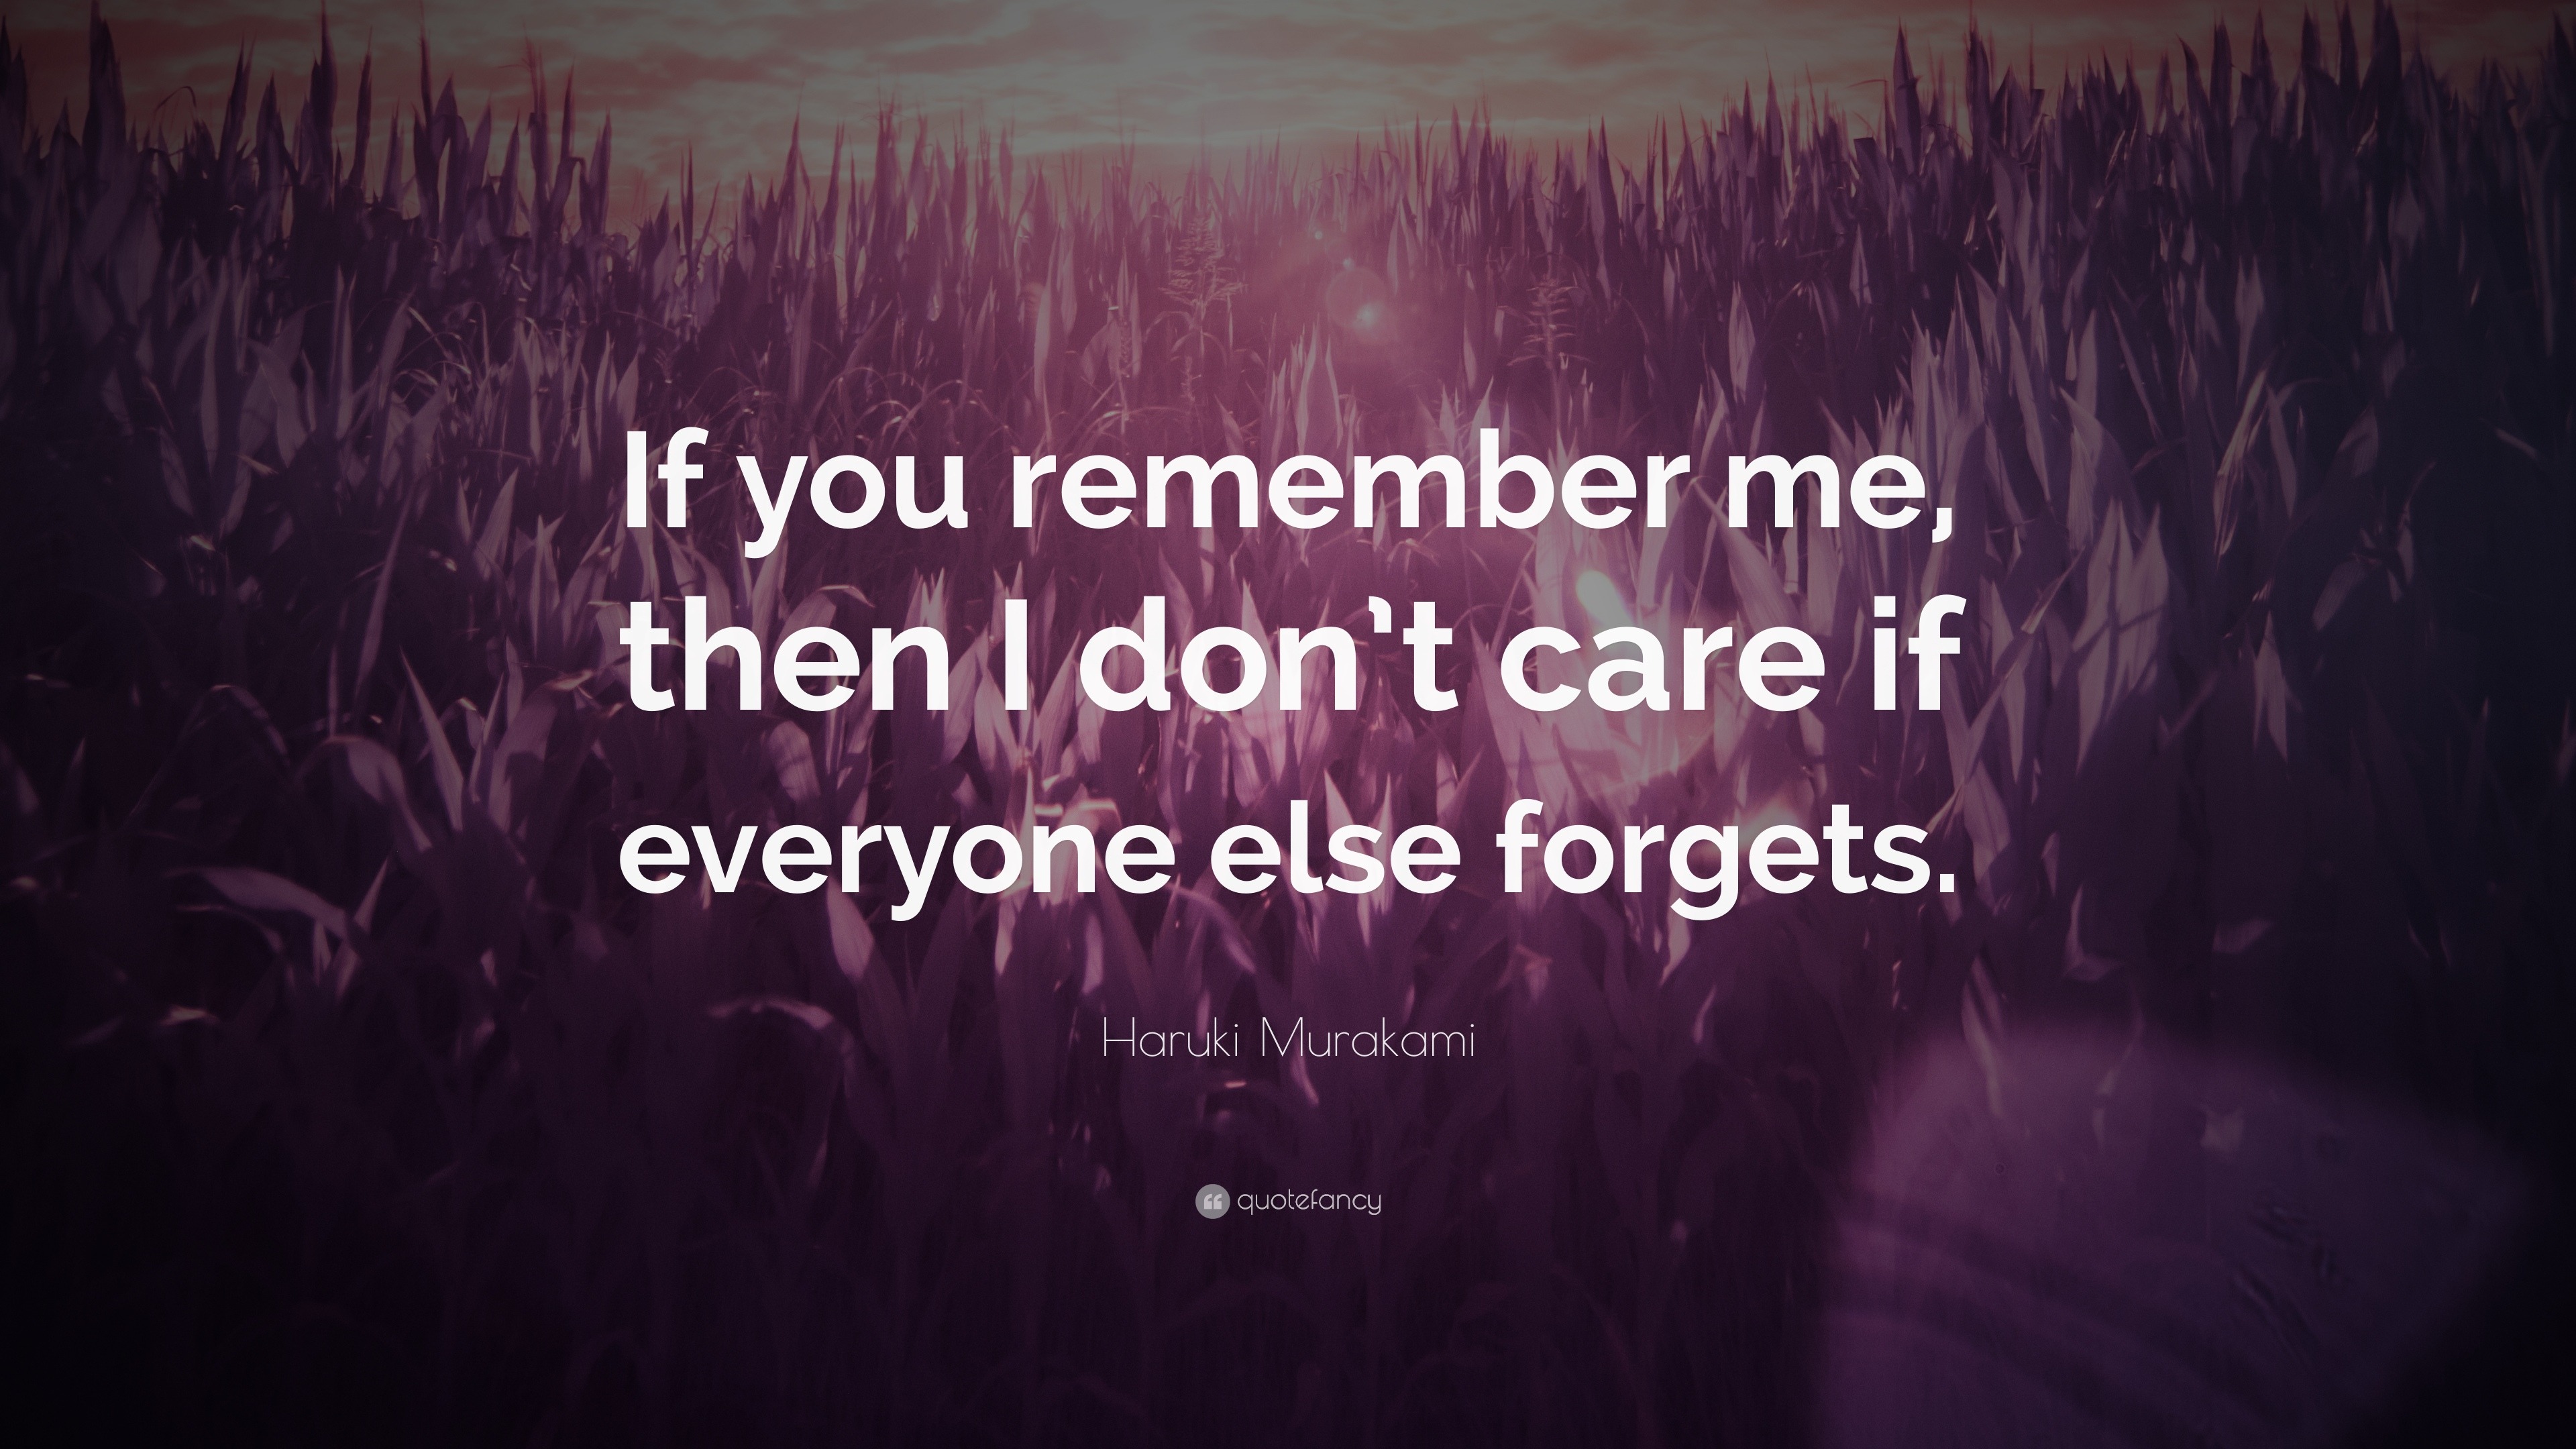 Haruki Murakami Quote “if You Remember Me Then I Dont Care If Everyone Else Forgets”